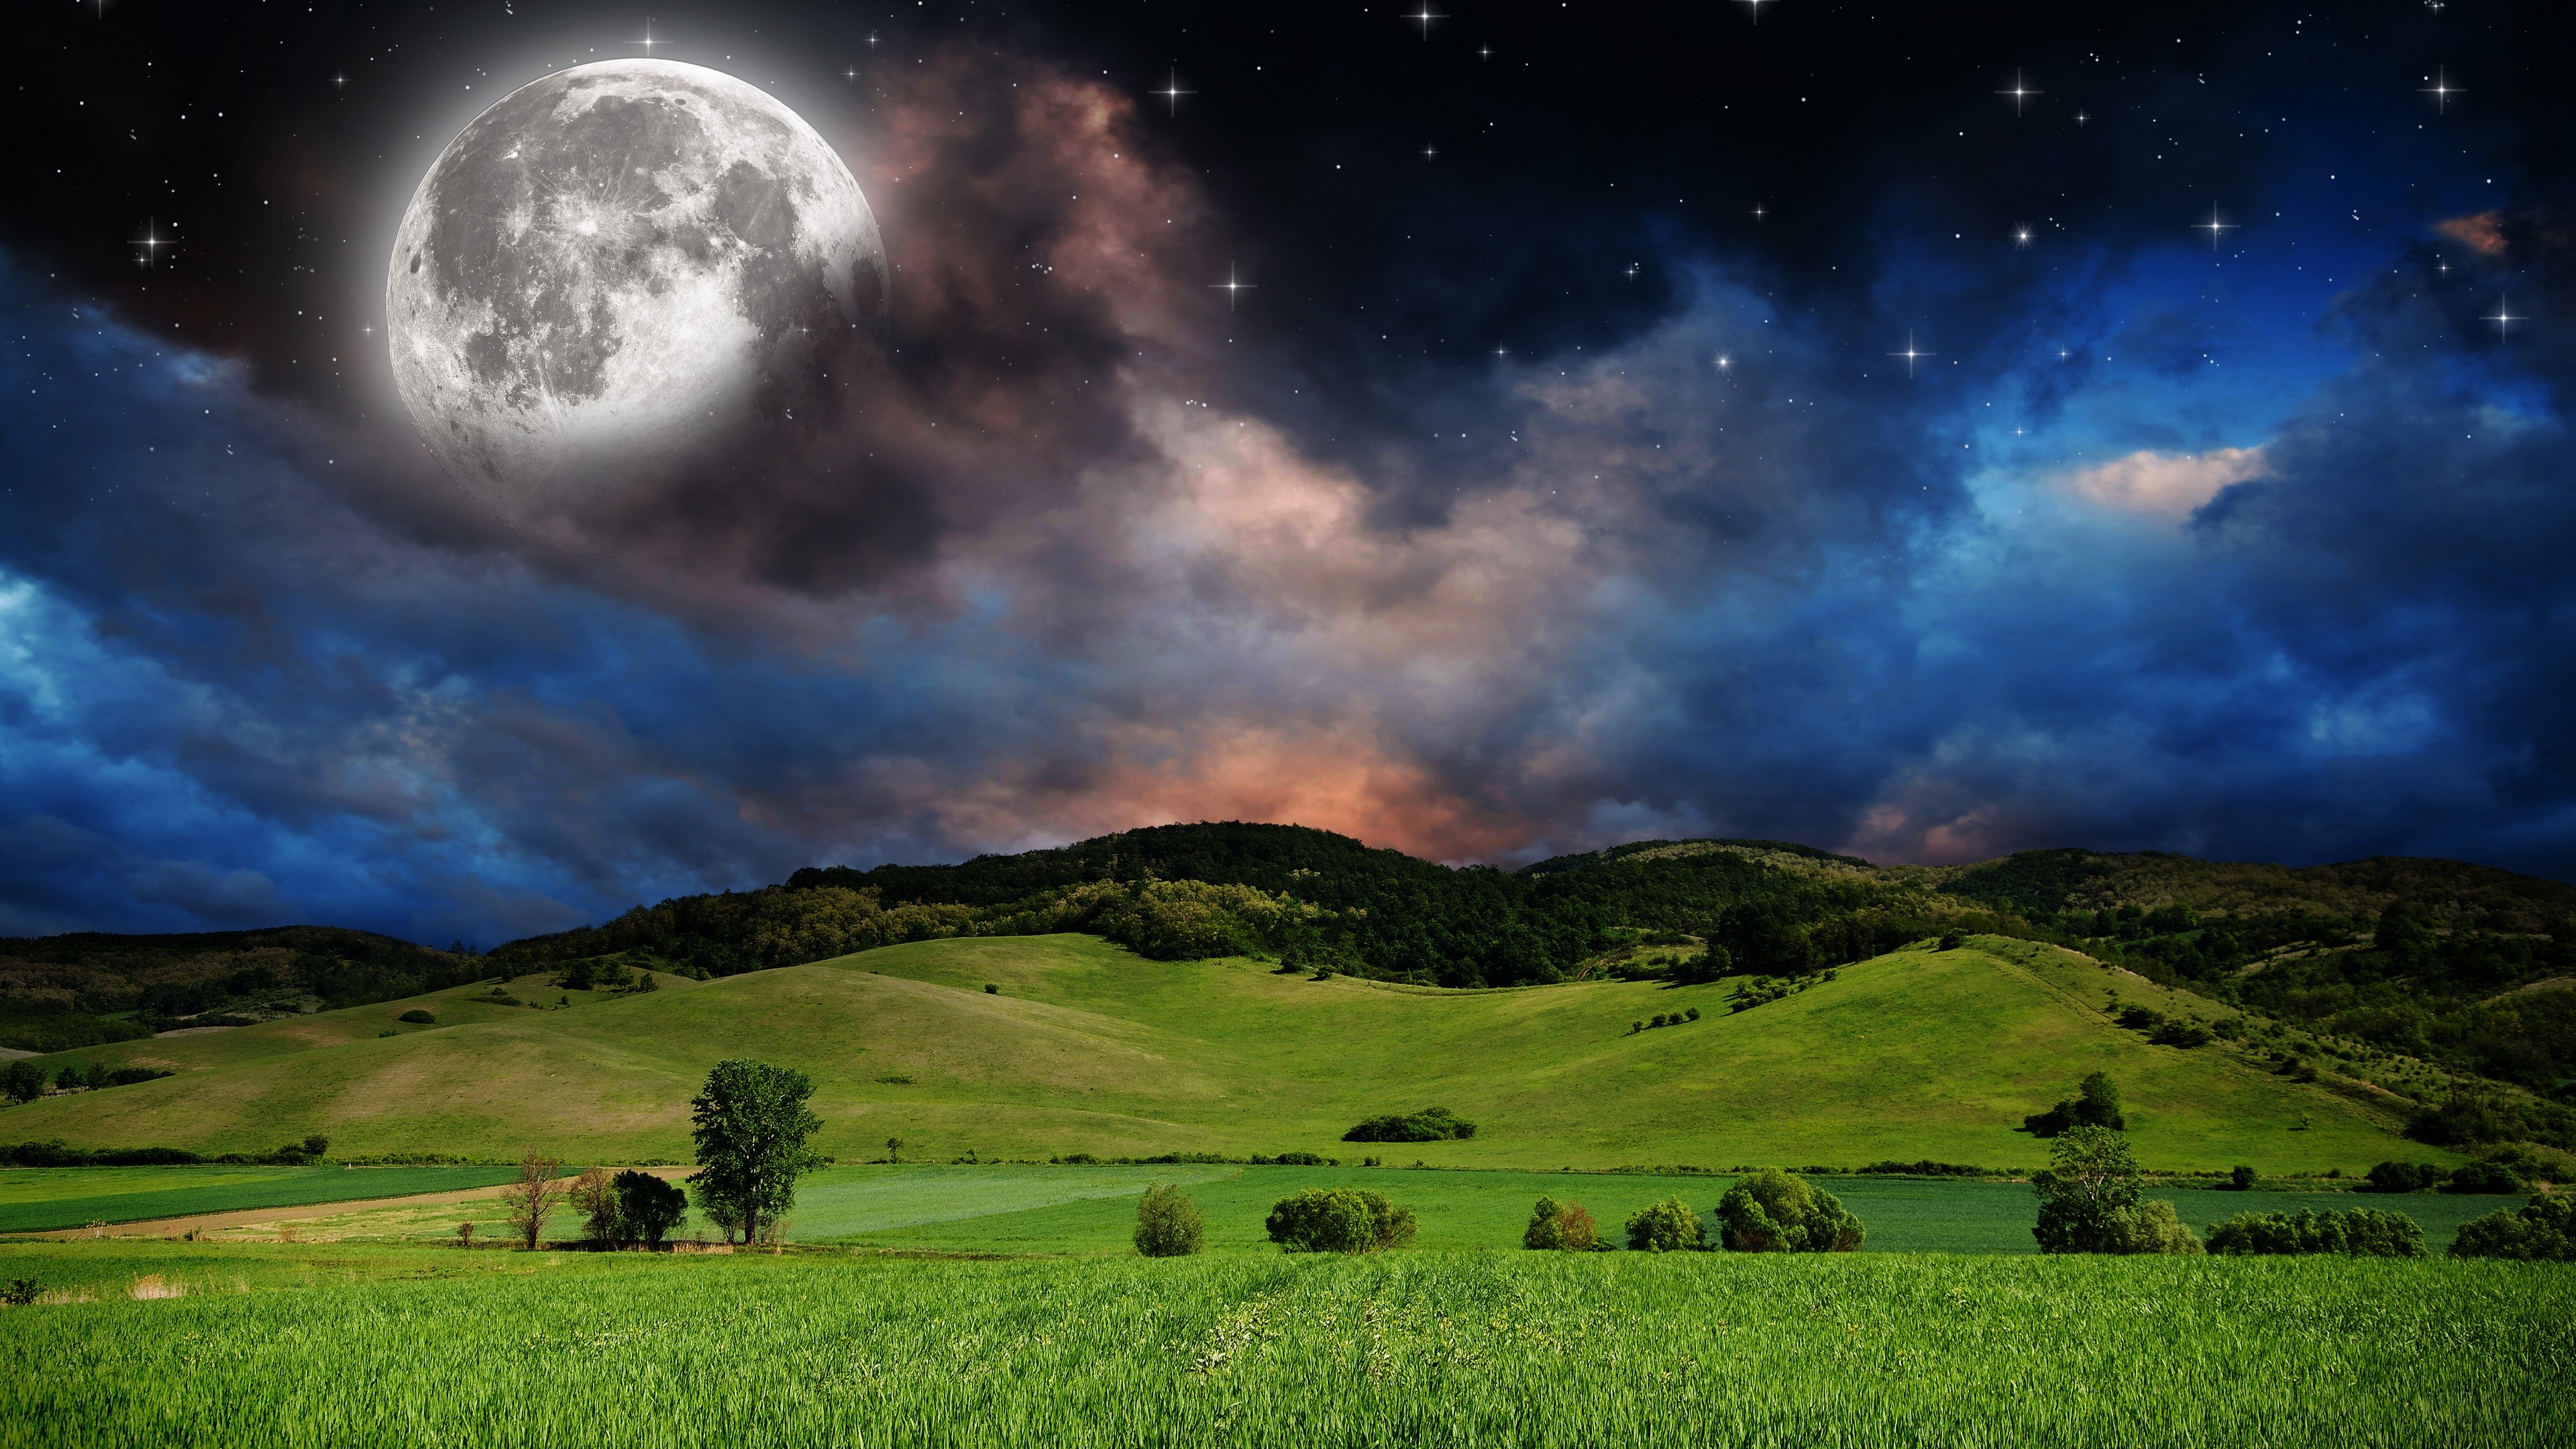 Artistic Full Moon In Starry Night Sky Wallpapers